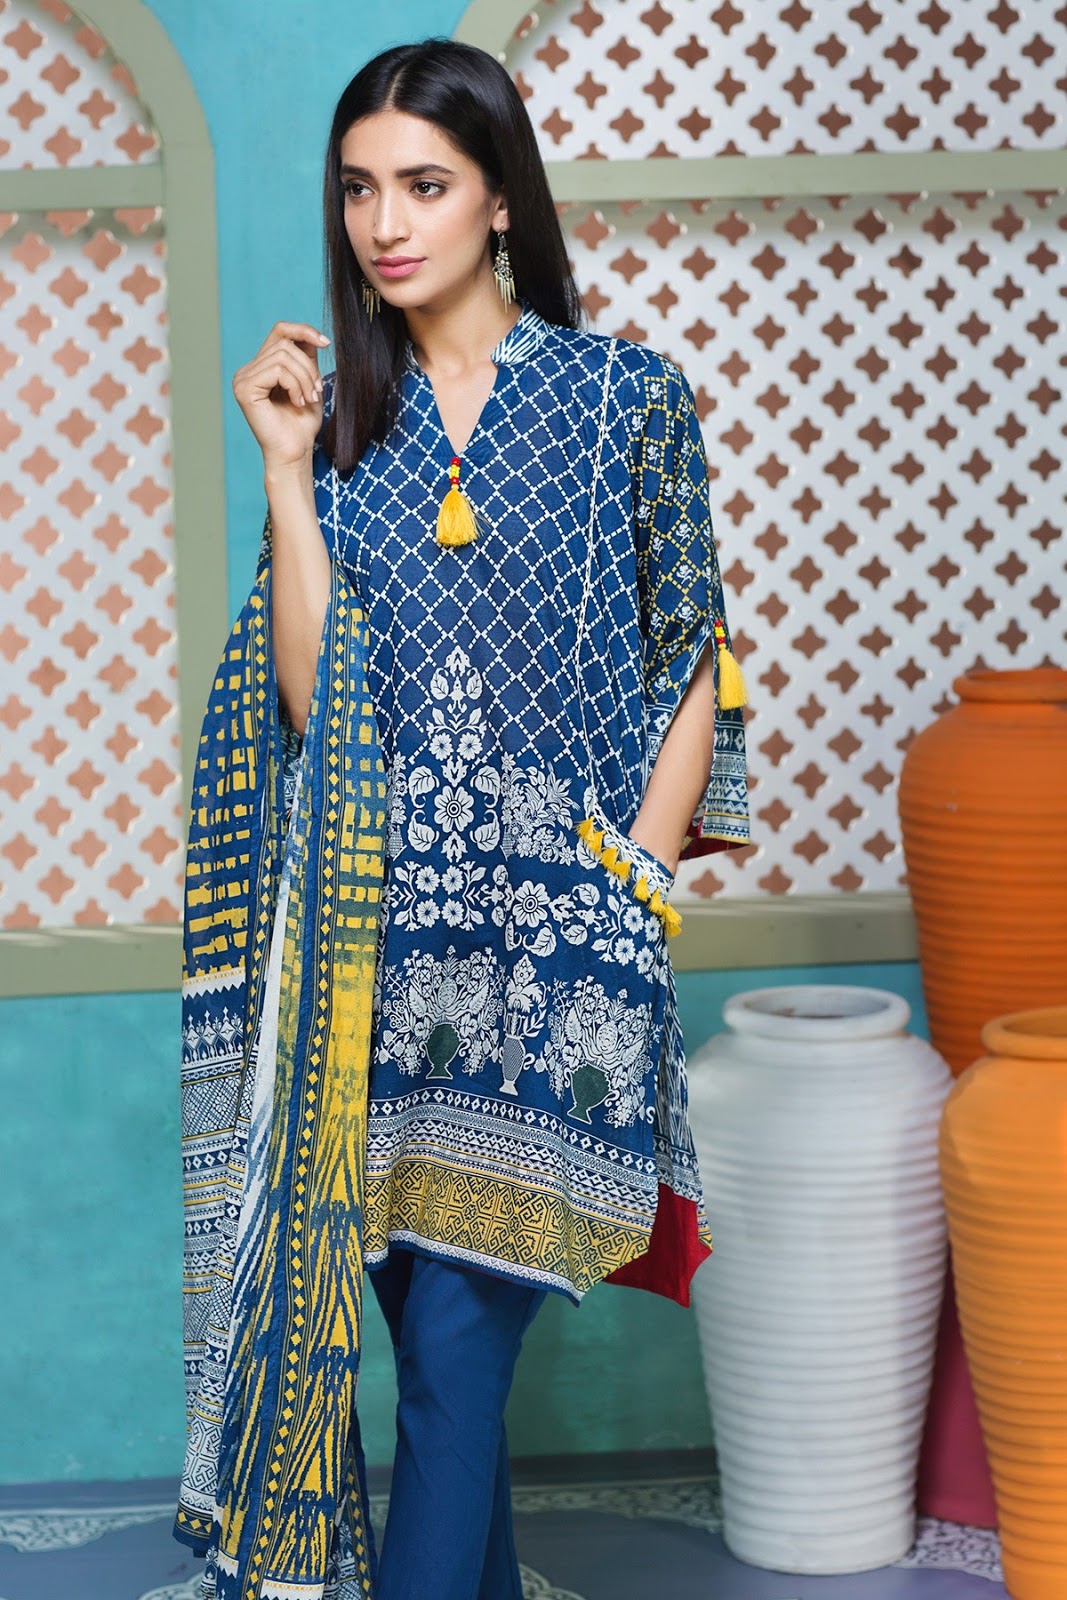 Khaadi Unstitched Eid Collection 2017 A17311-B-BLUE with model Rubab Ali